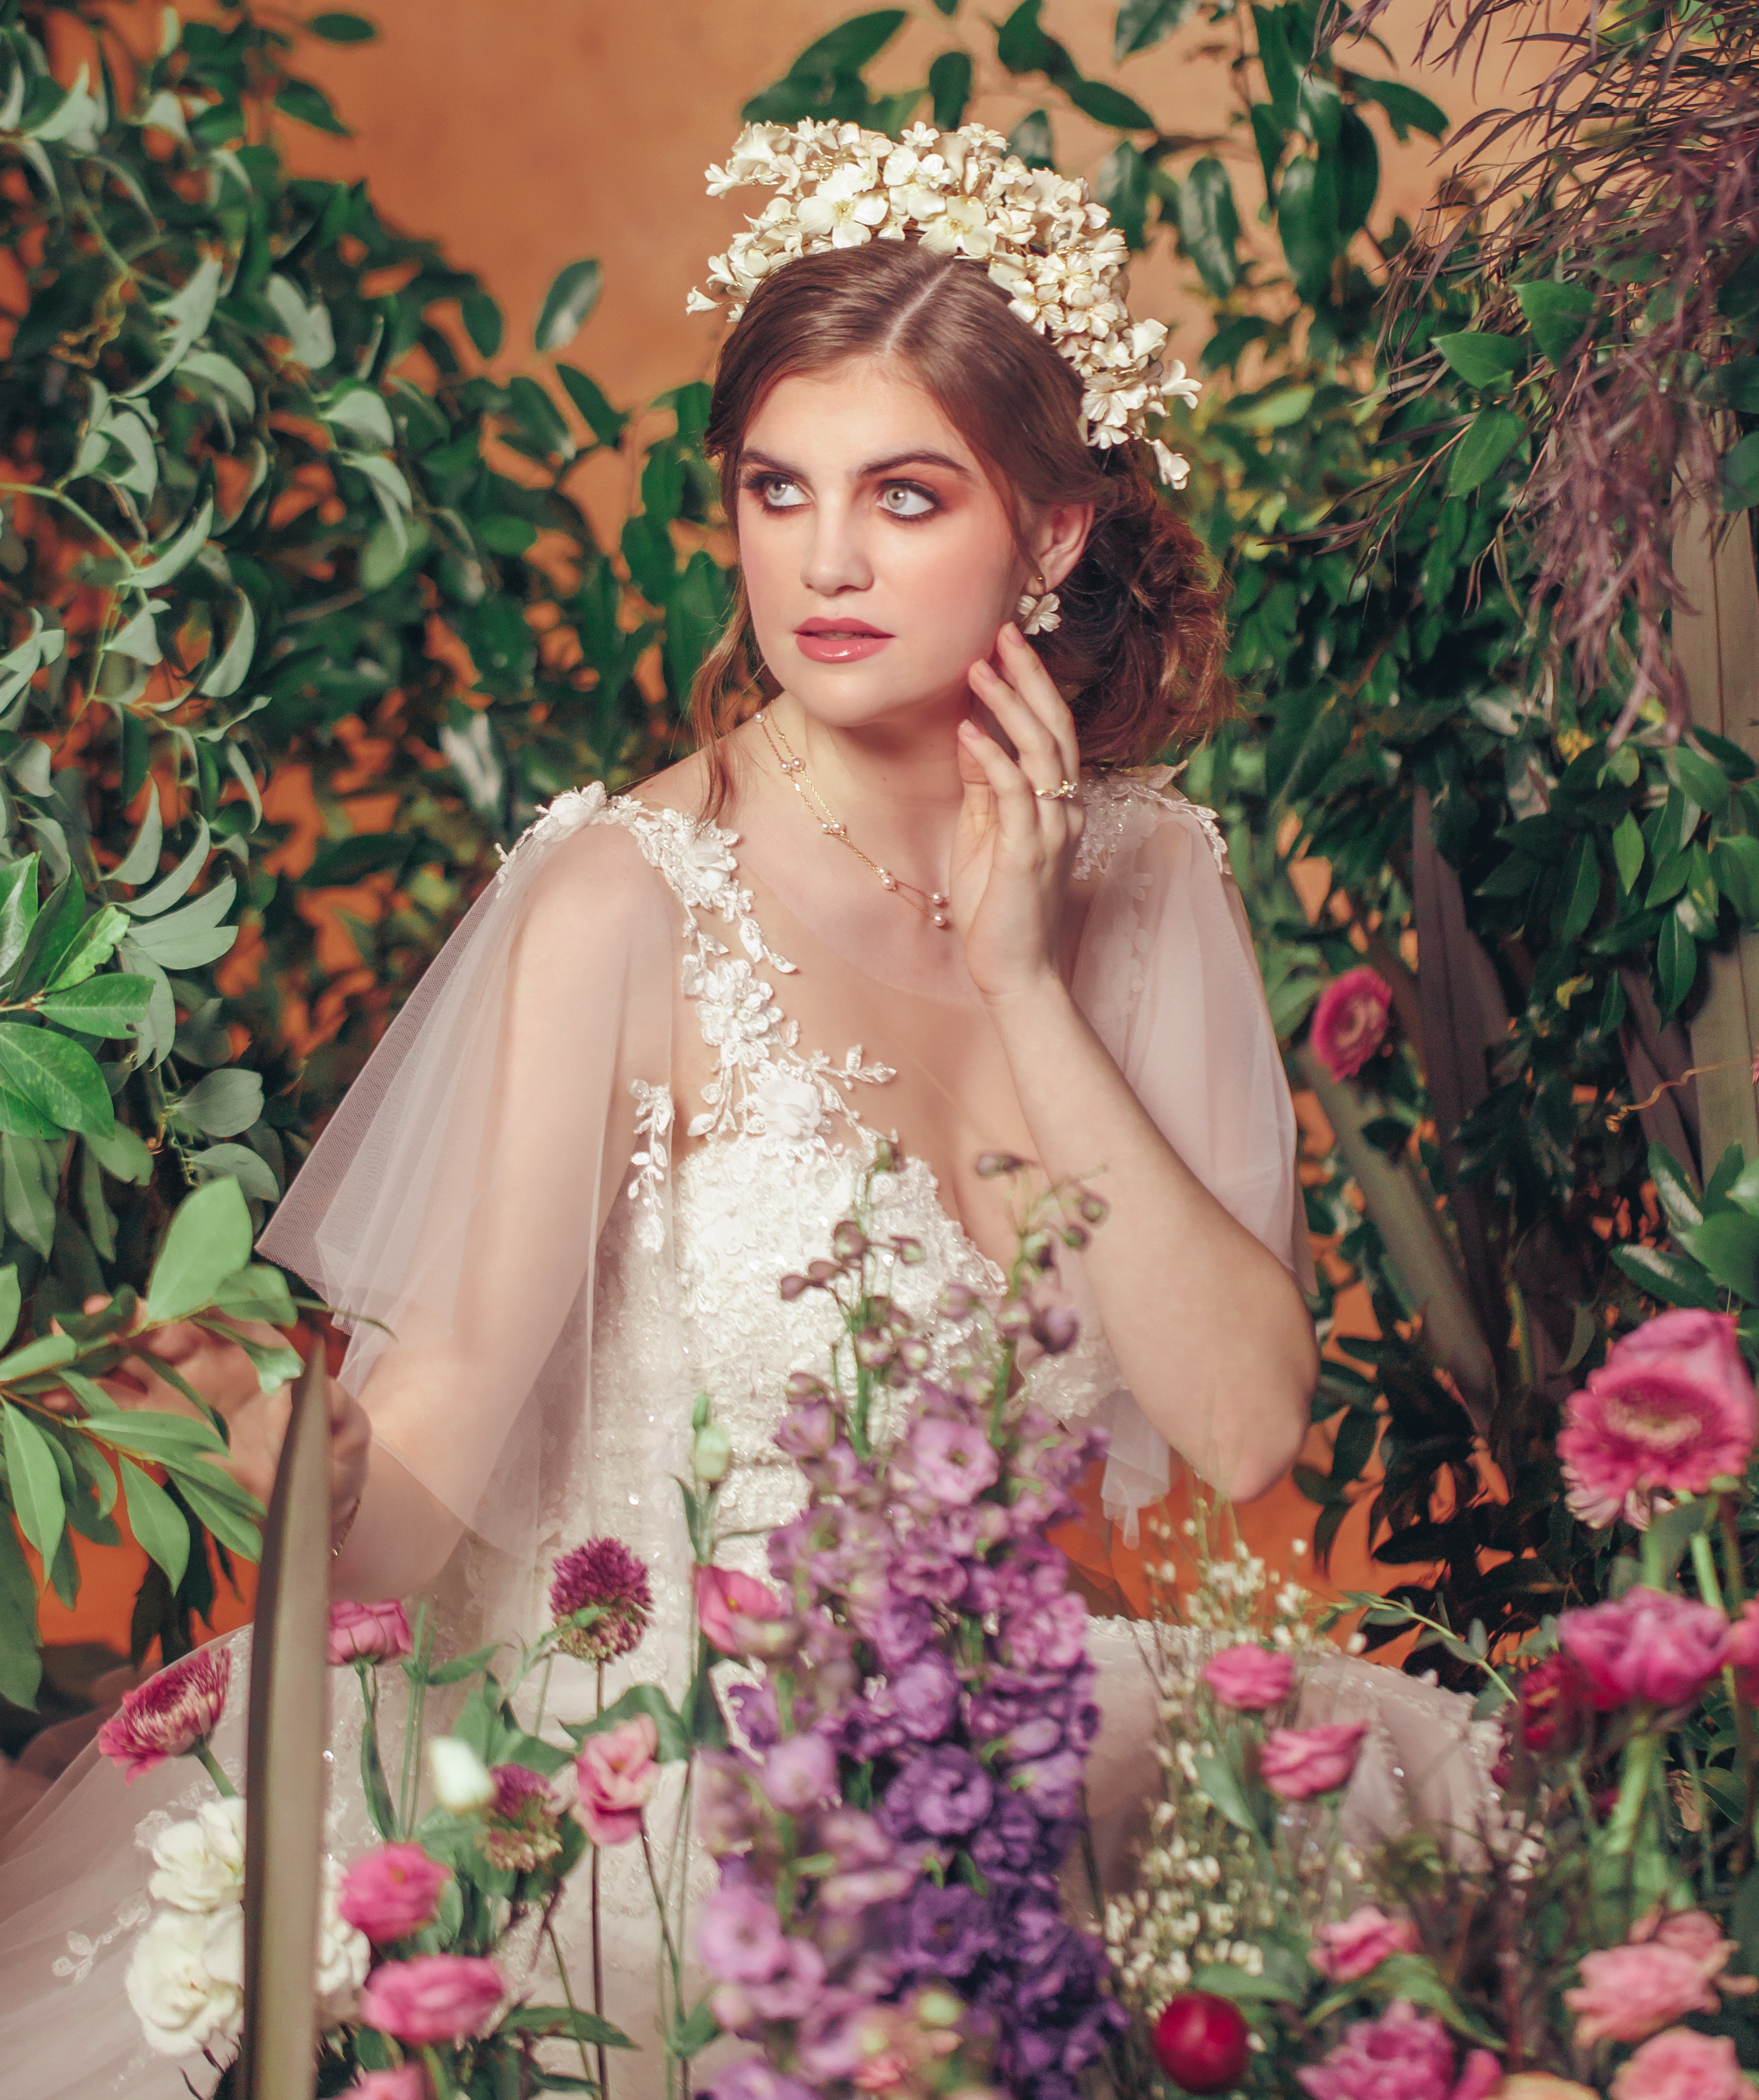 A bride wears a floral headpiece and sits in a bed of flowers.